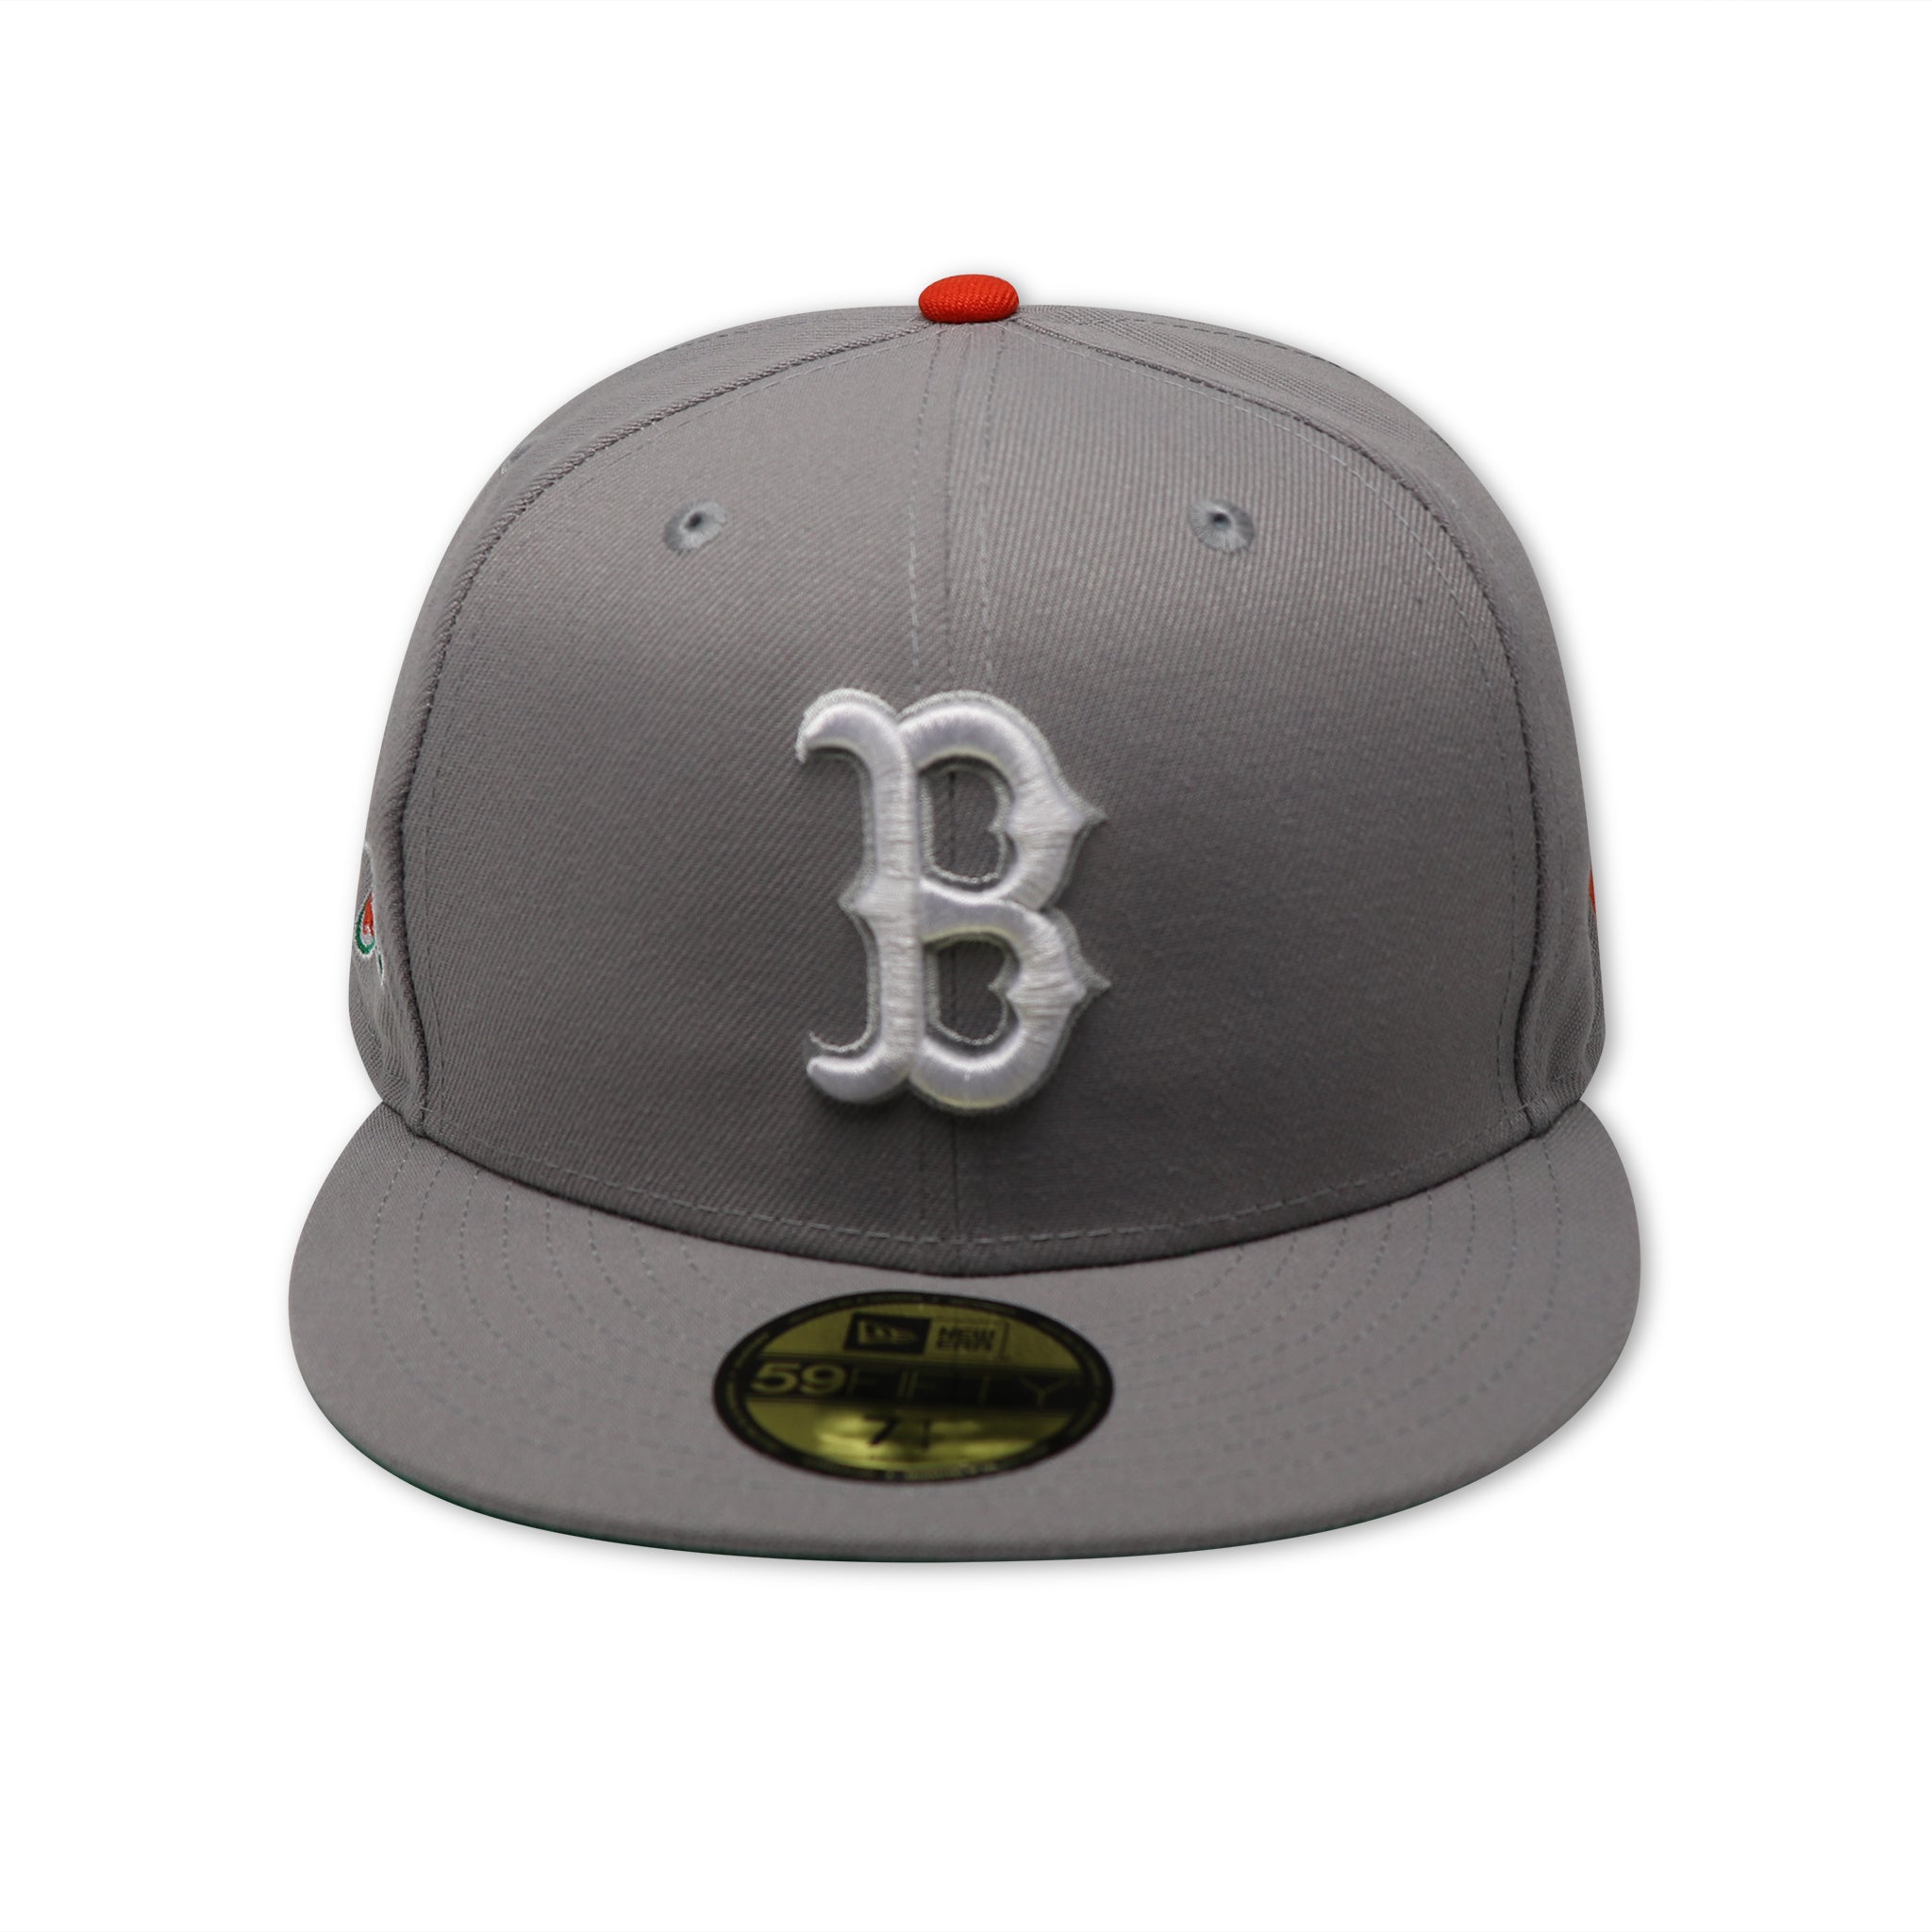 BOSTON RED SOX (FENWAY PARK 100 YEARS) NEW ERA 59FIFTY FITTED (GREEN)